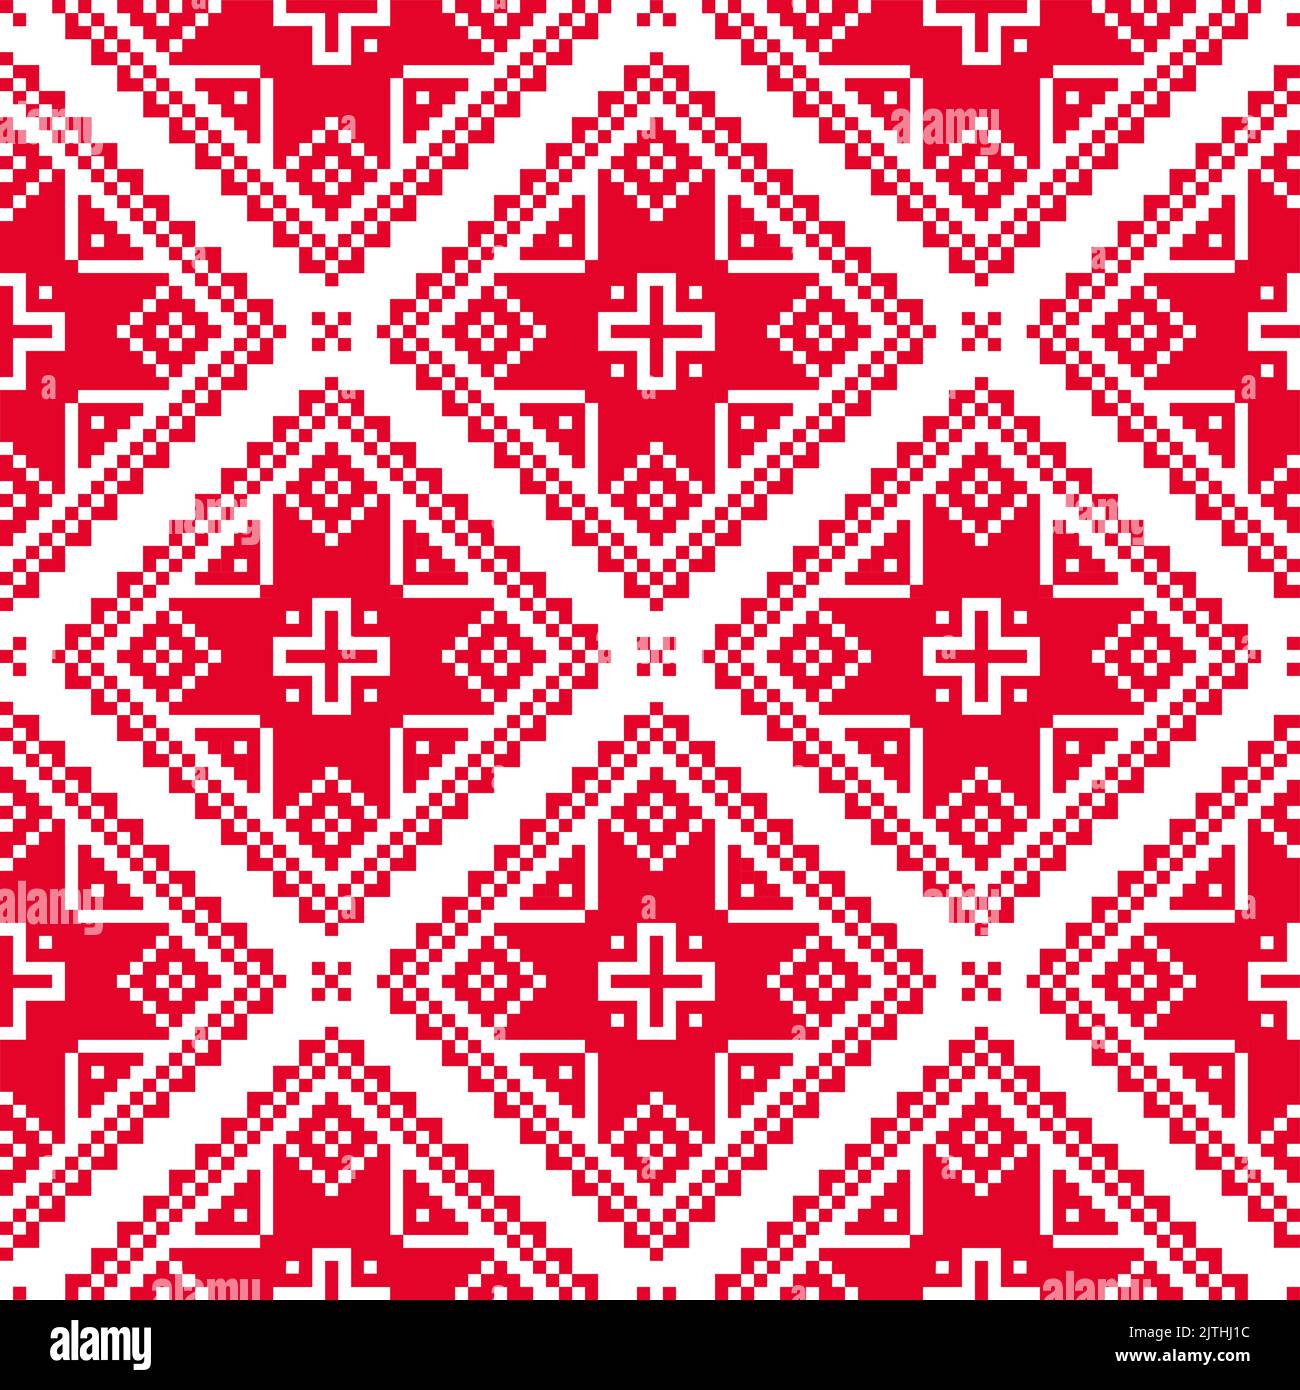 DPASIi Fashion 3D Face Protect Printed，Traditional Ukrainian Borders Frames Ornaments Old Fashioned Cultural Motifs 